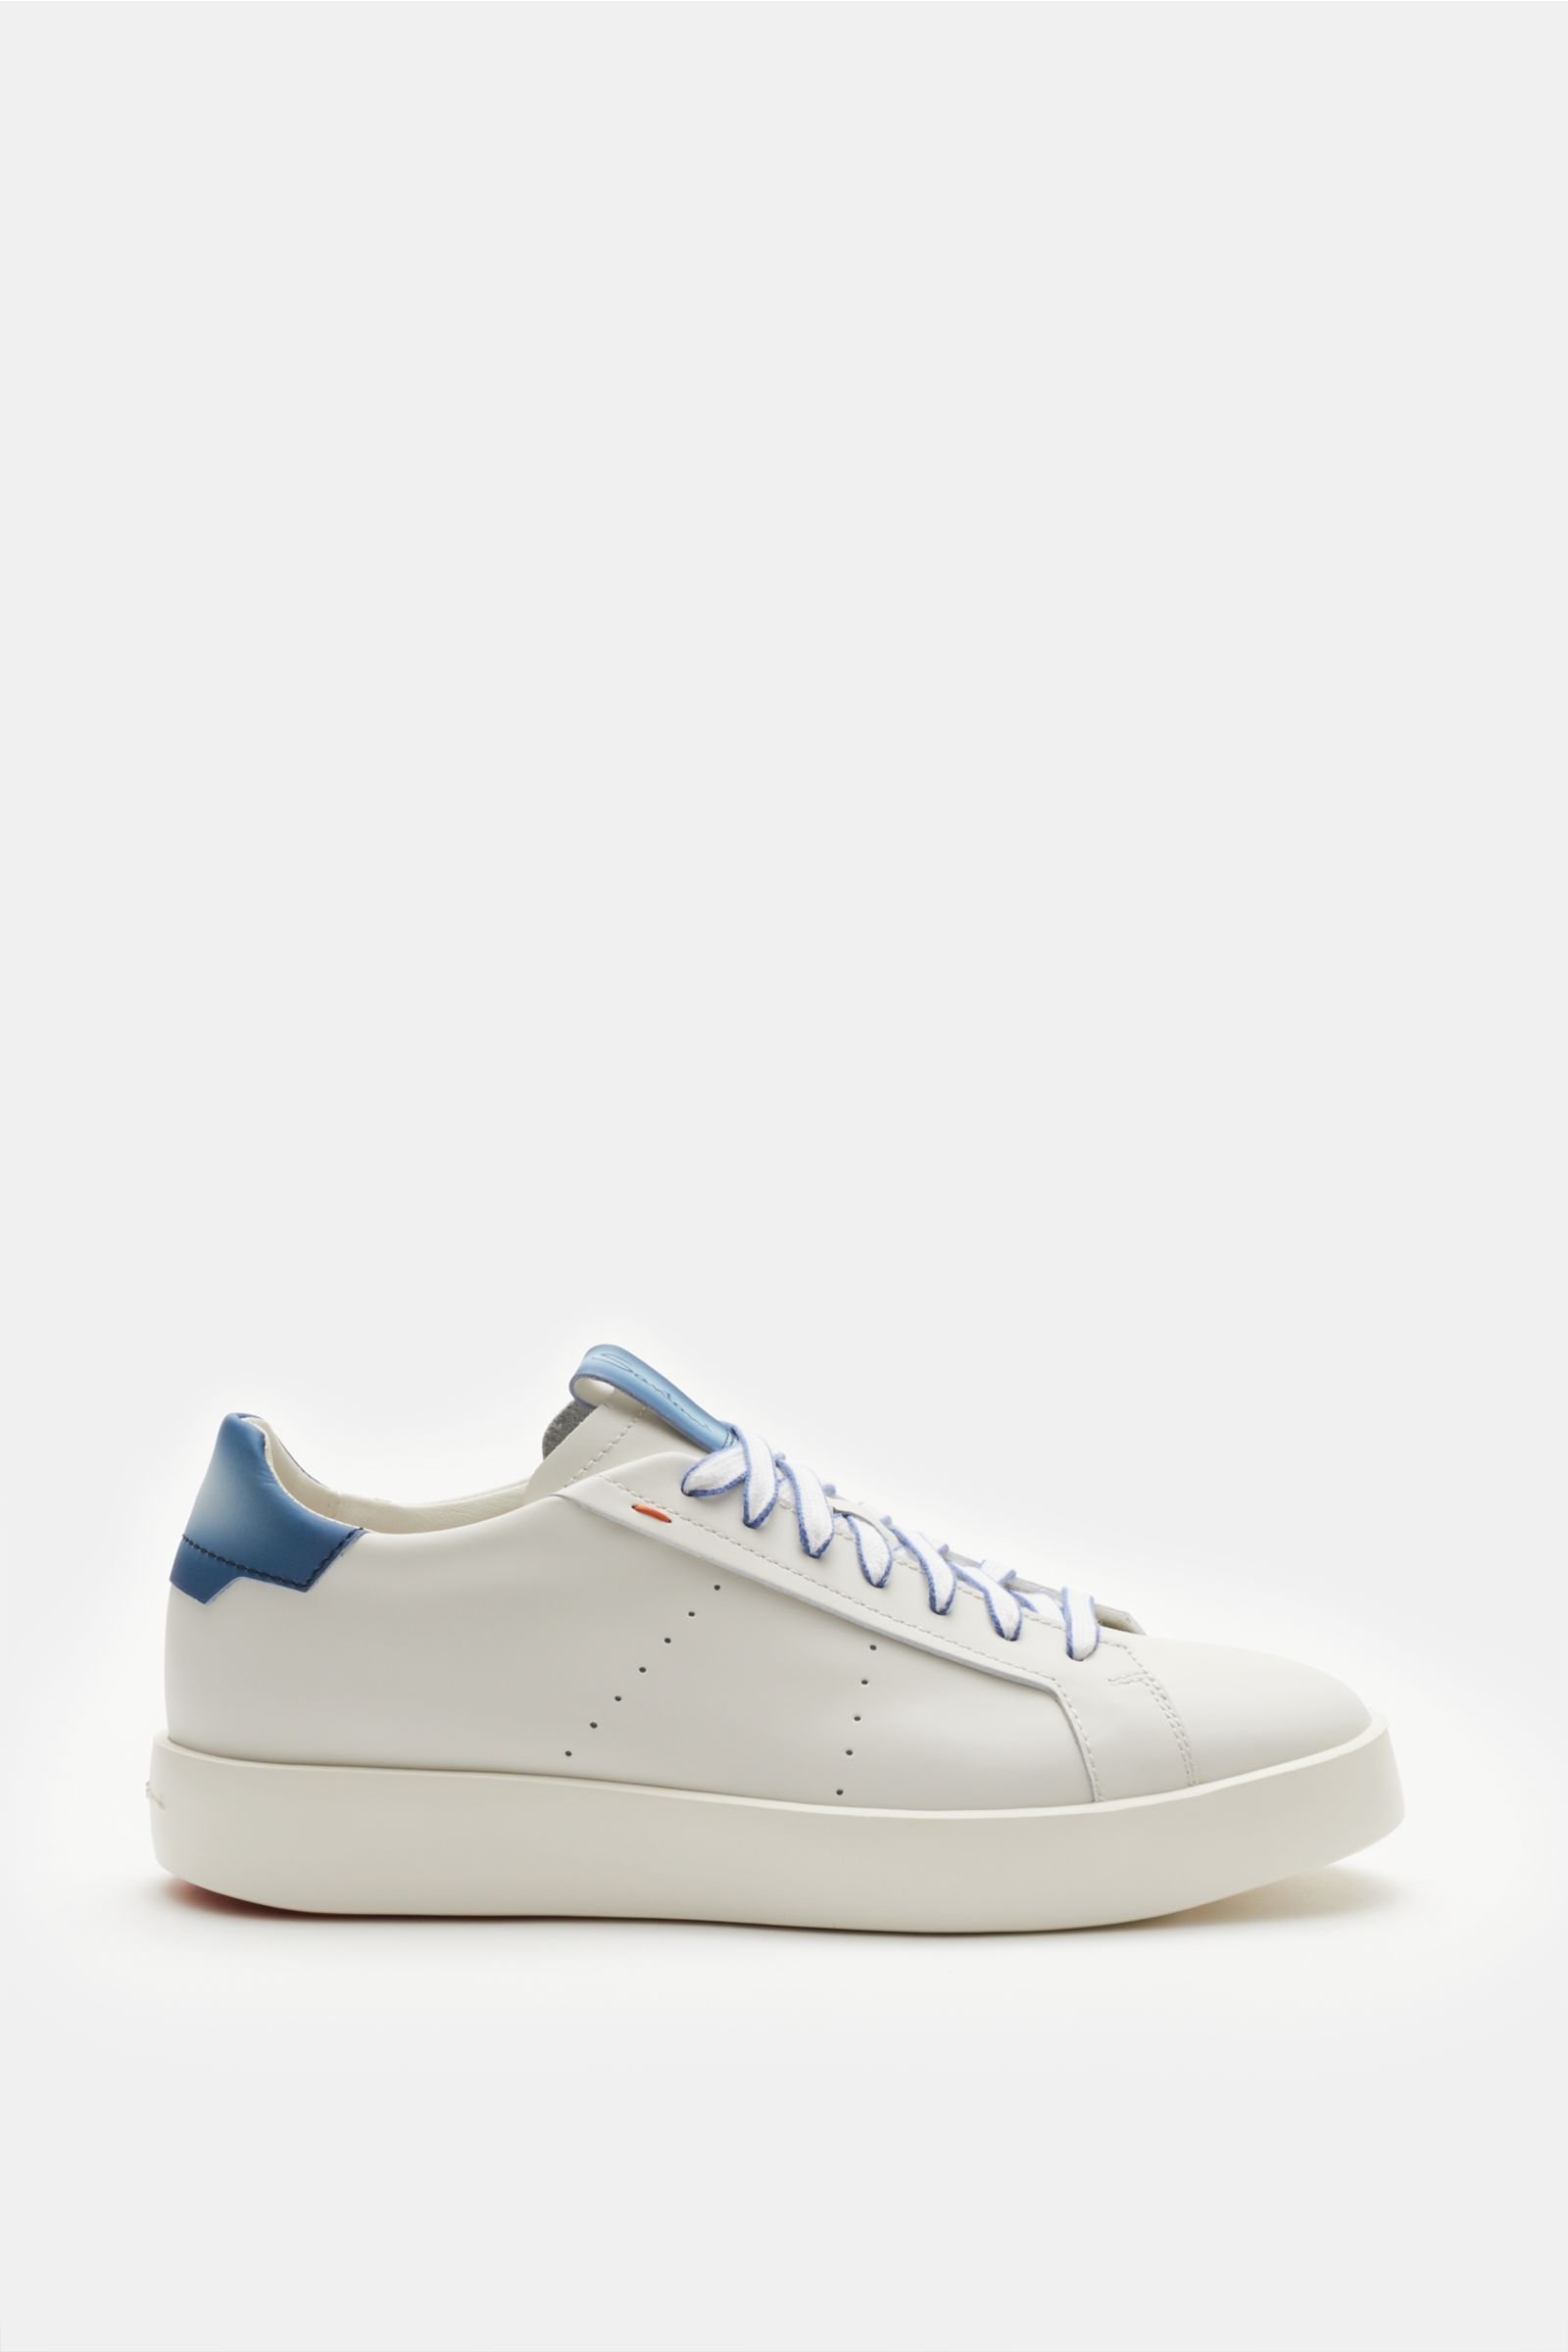 Sneakers white/grey-blue 